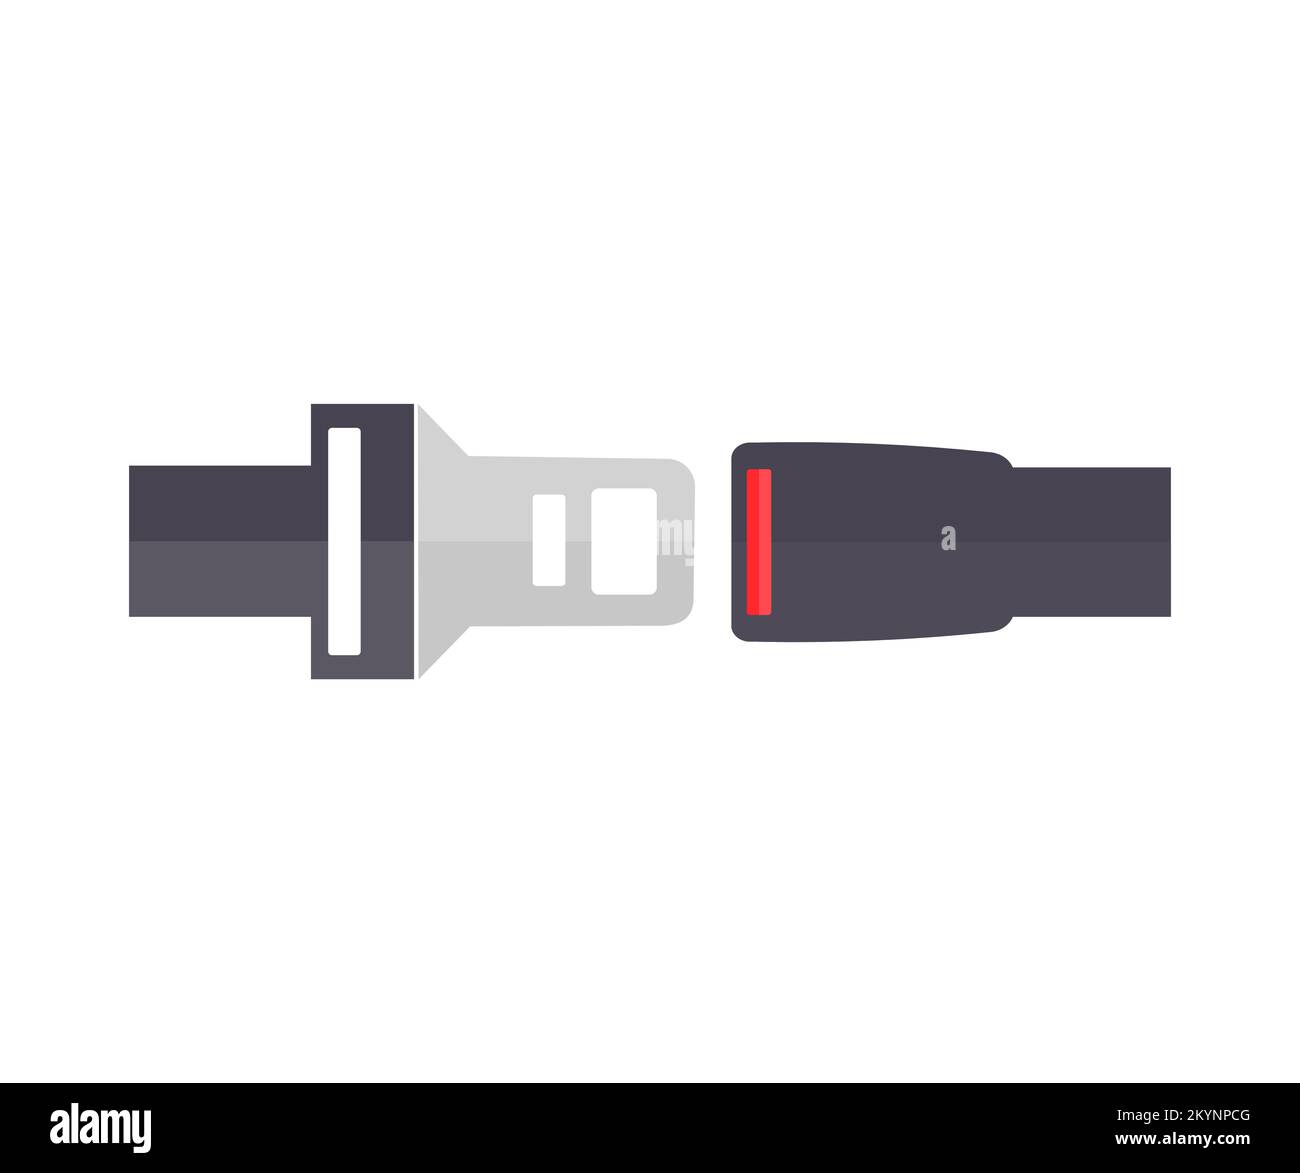 Open car safety seat belt. Seat safety belt in car for safety before driving on the road logo design. Concept transport travel, safe driving rule. Stock Vector